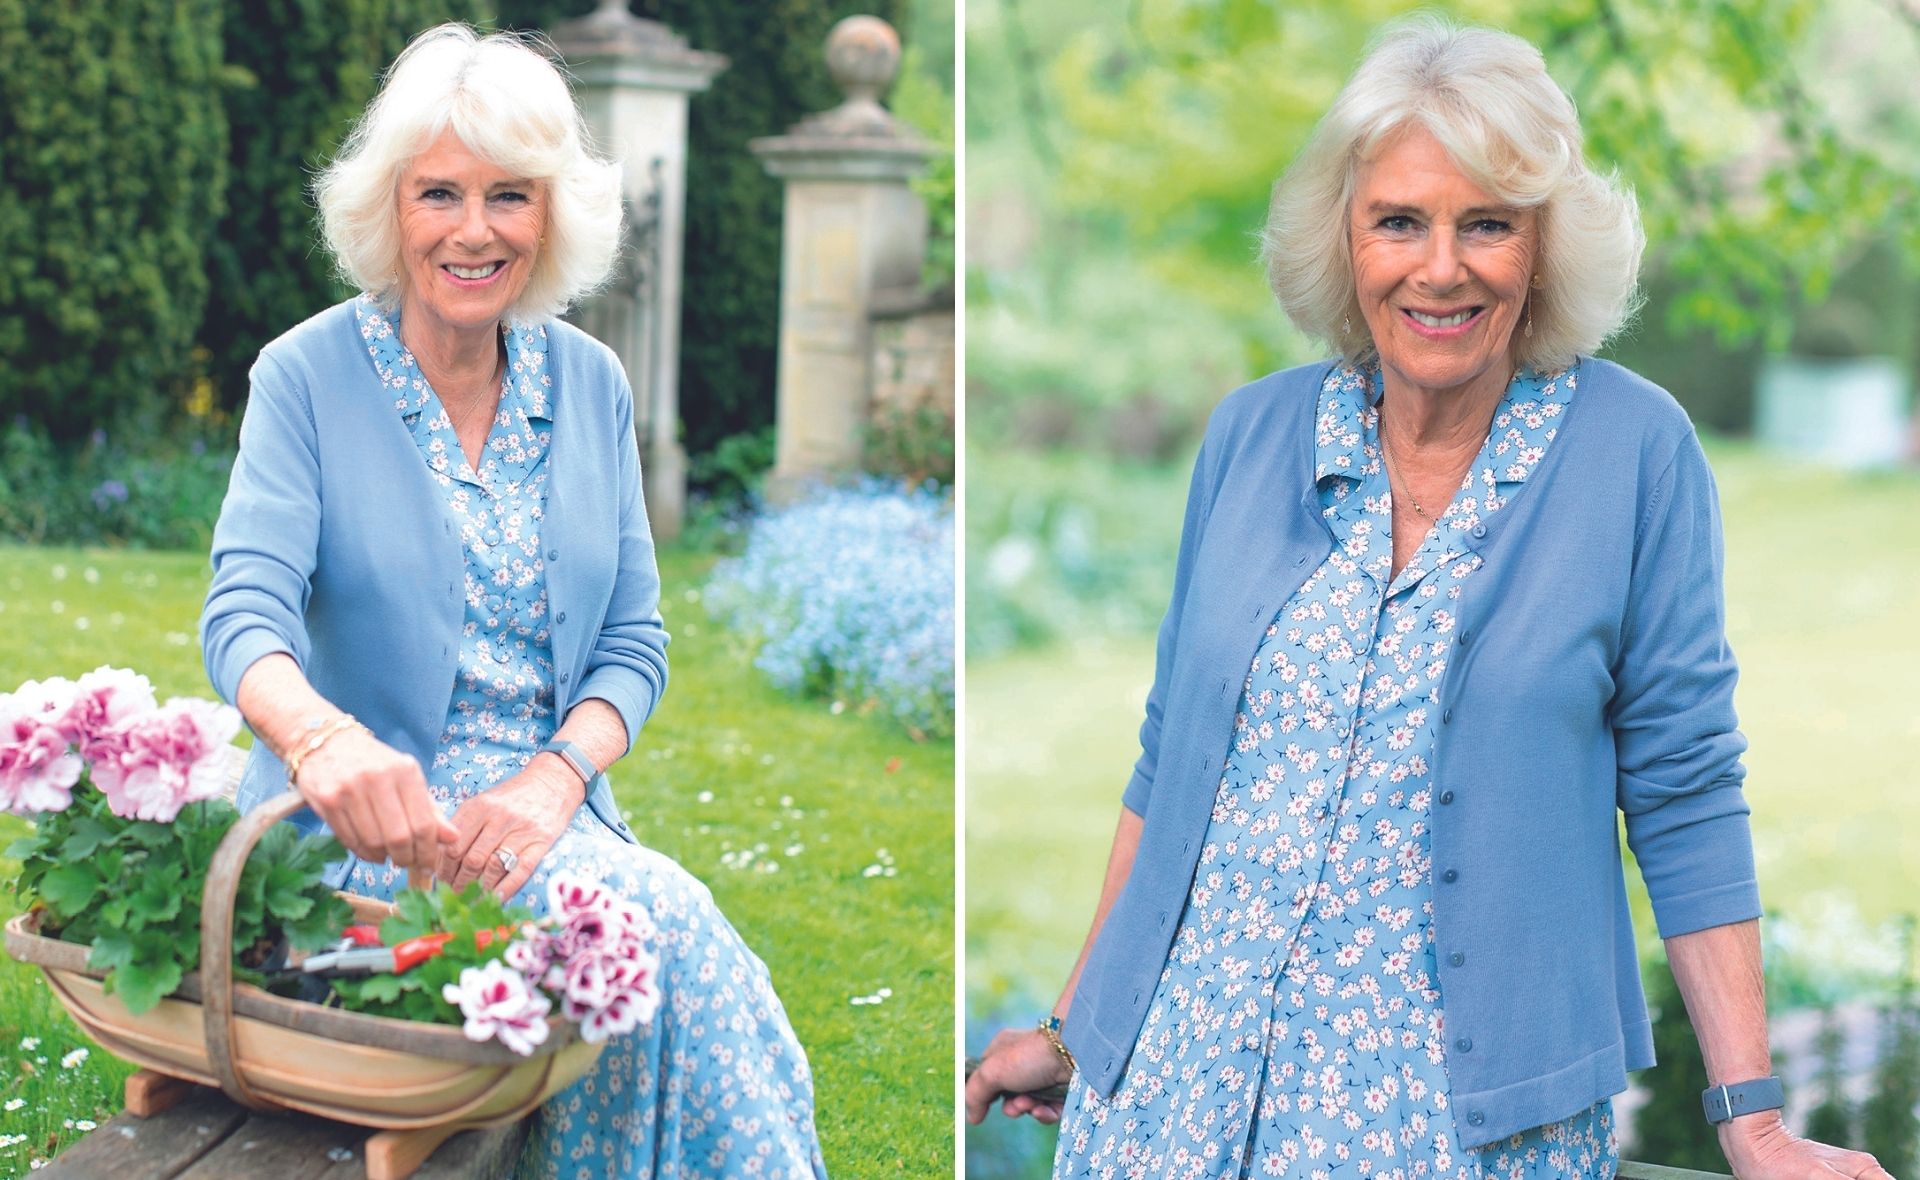 The Australian Women’s Weekly speaks exclusively with Camilla, Duchess of Cornwall for her 75th birthday